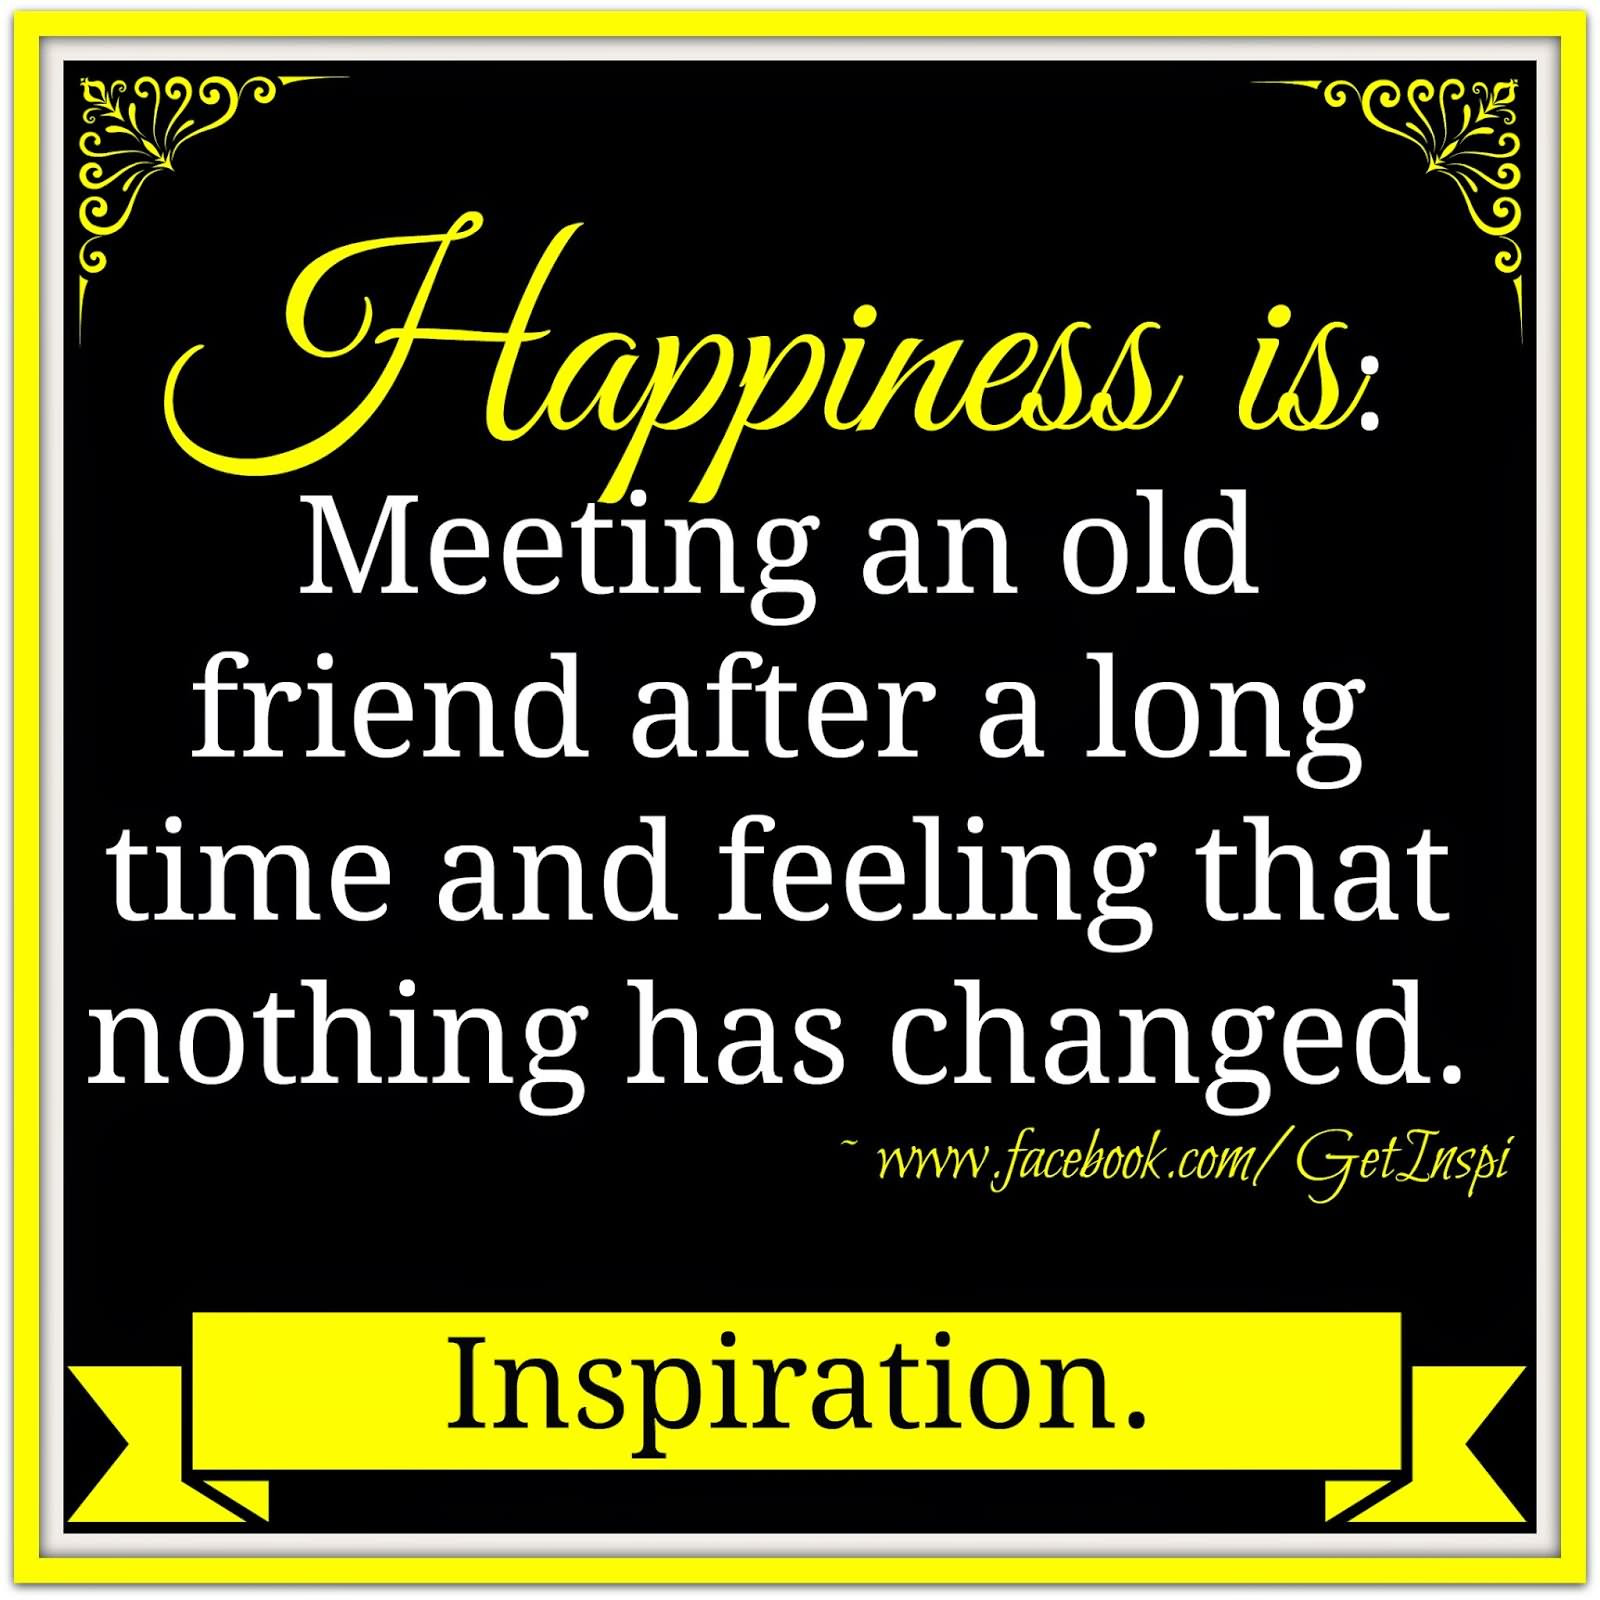 Old Friendship Quotes
 Happiness is meeting an old friend after a long time and